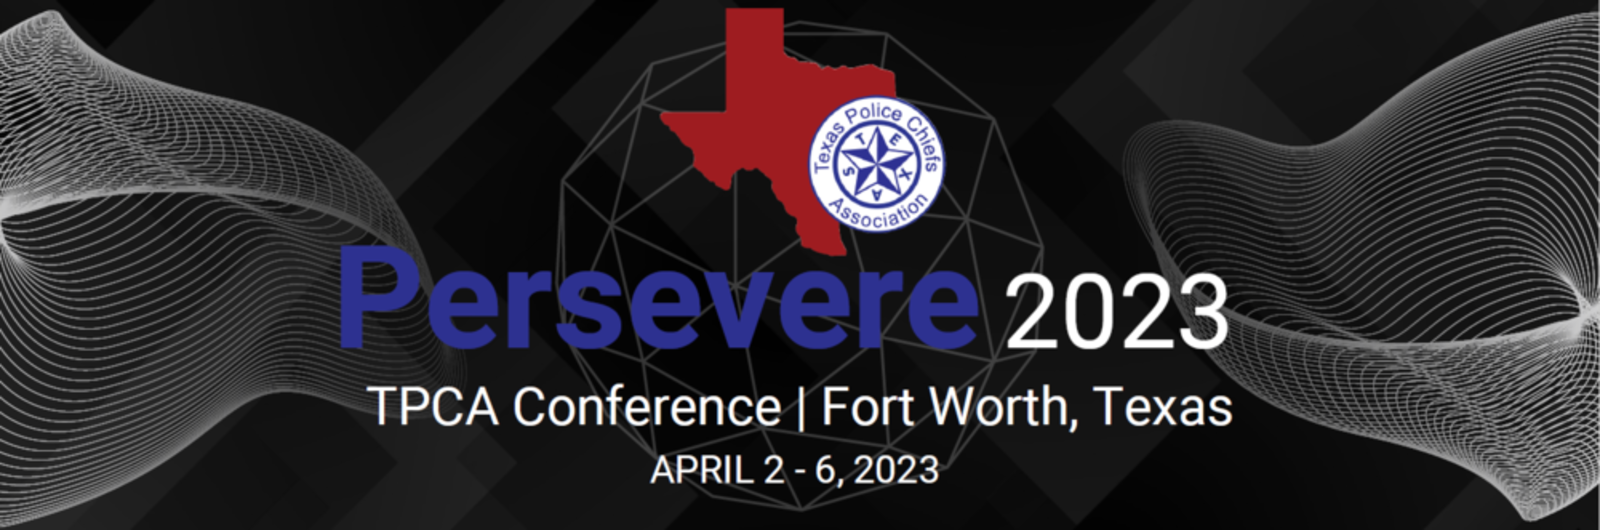 Black Banner with Persevere 2023 Fort Worth April 2-6, 2023